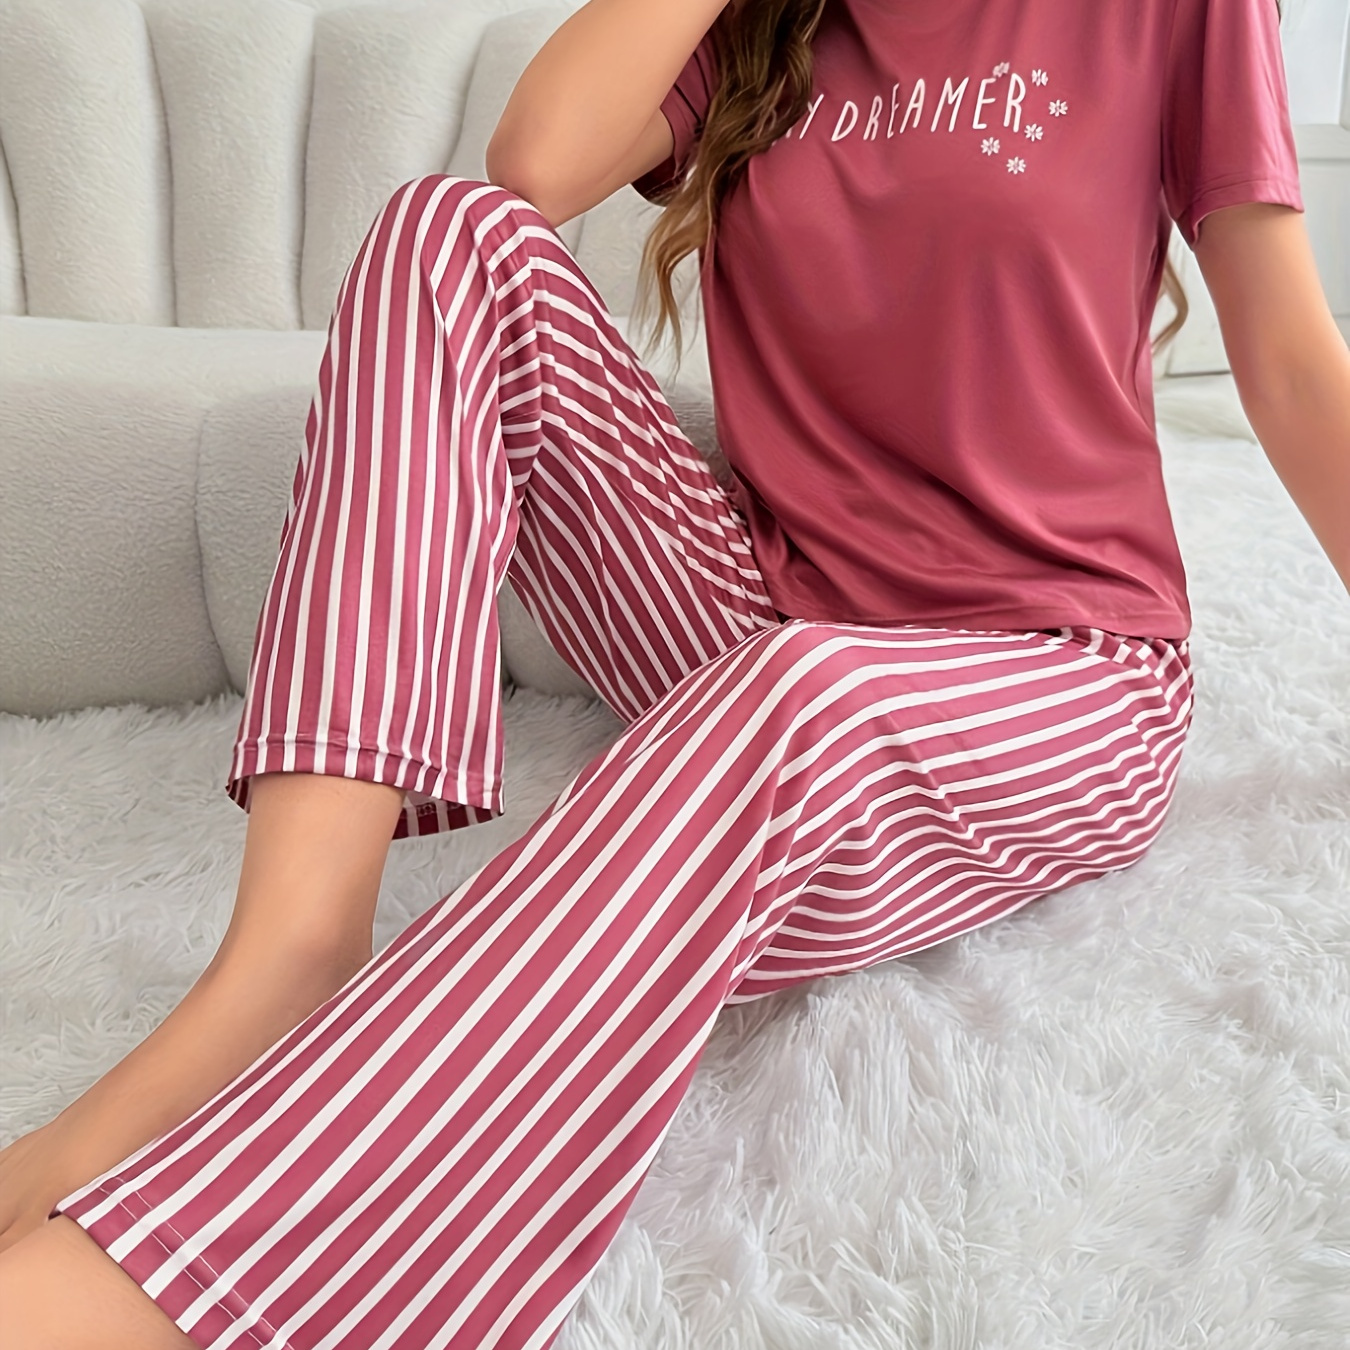 

Women's Letter Print Casual Pajama Set, Short Sleeve Round Neck Top & Striped Pants, Comfortable Relaxed Fit